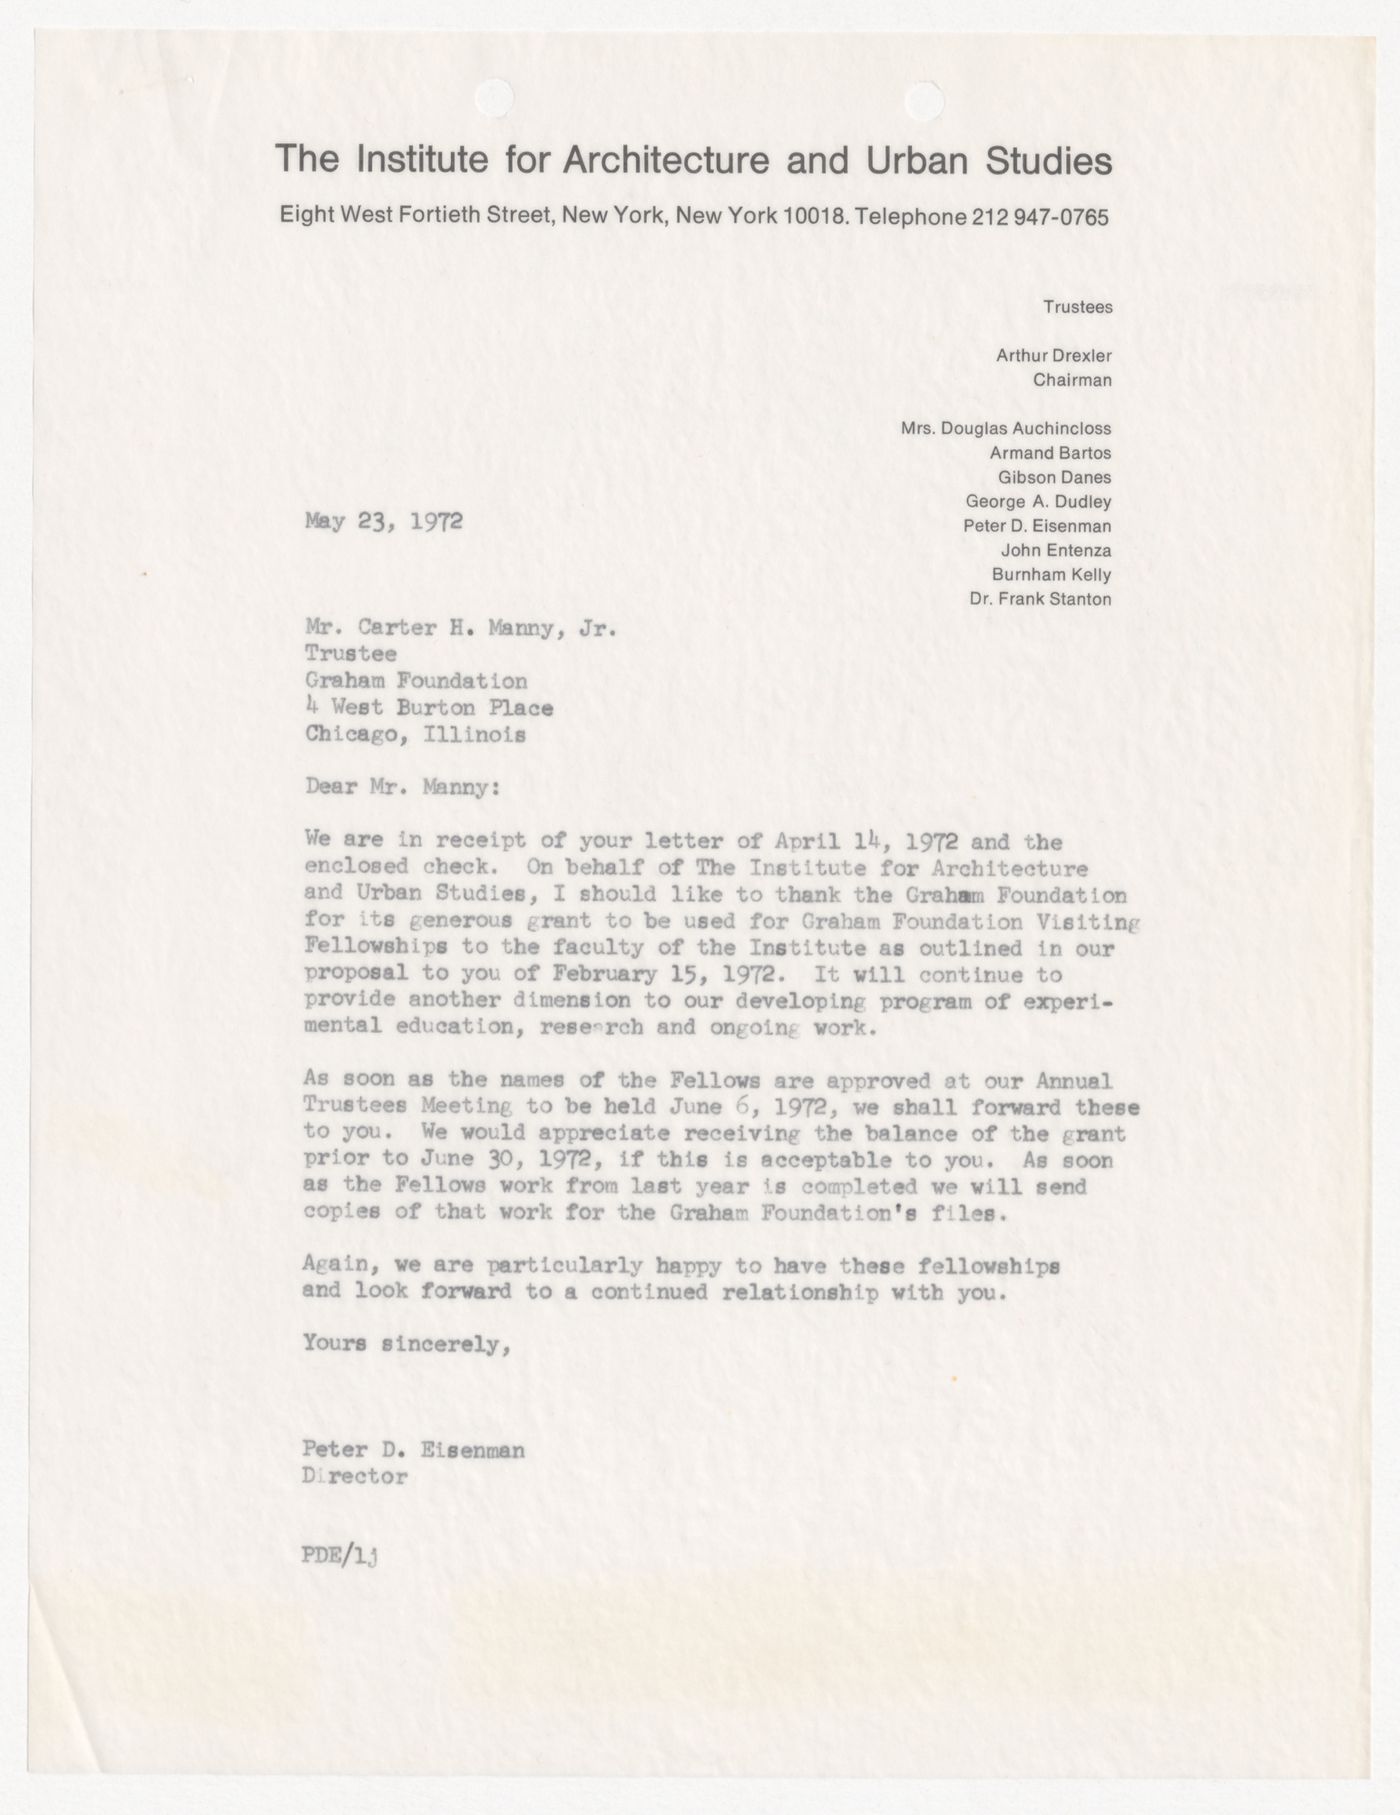 Letter from Peter D. Eisenman to Carter H. Manny Jr. acknowledging grant from the Graham Foundation